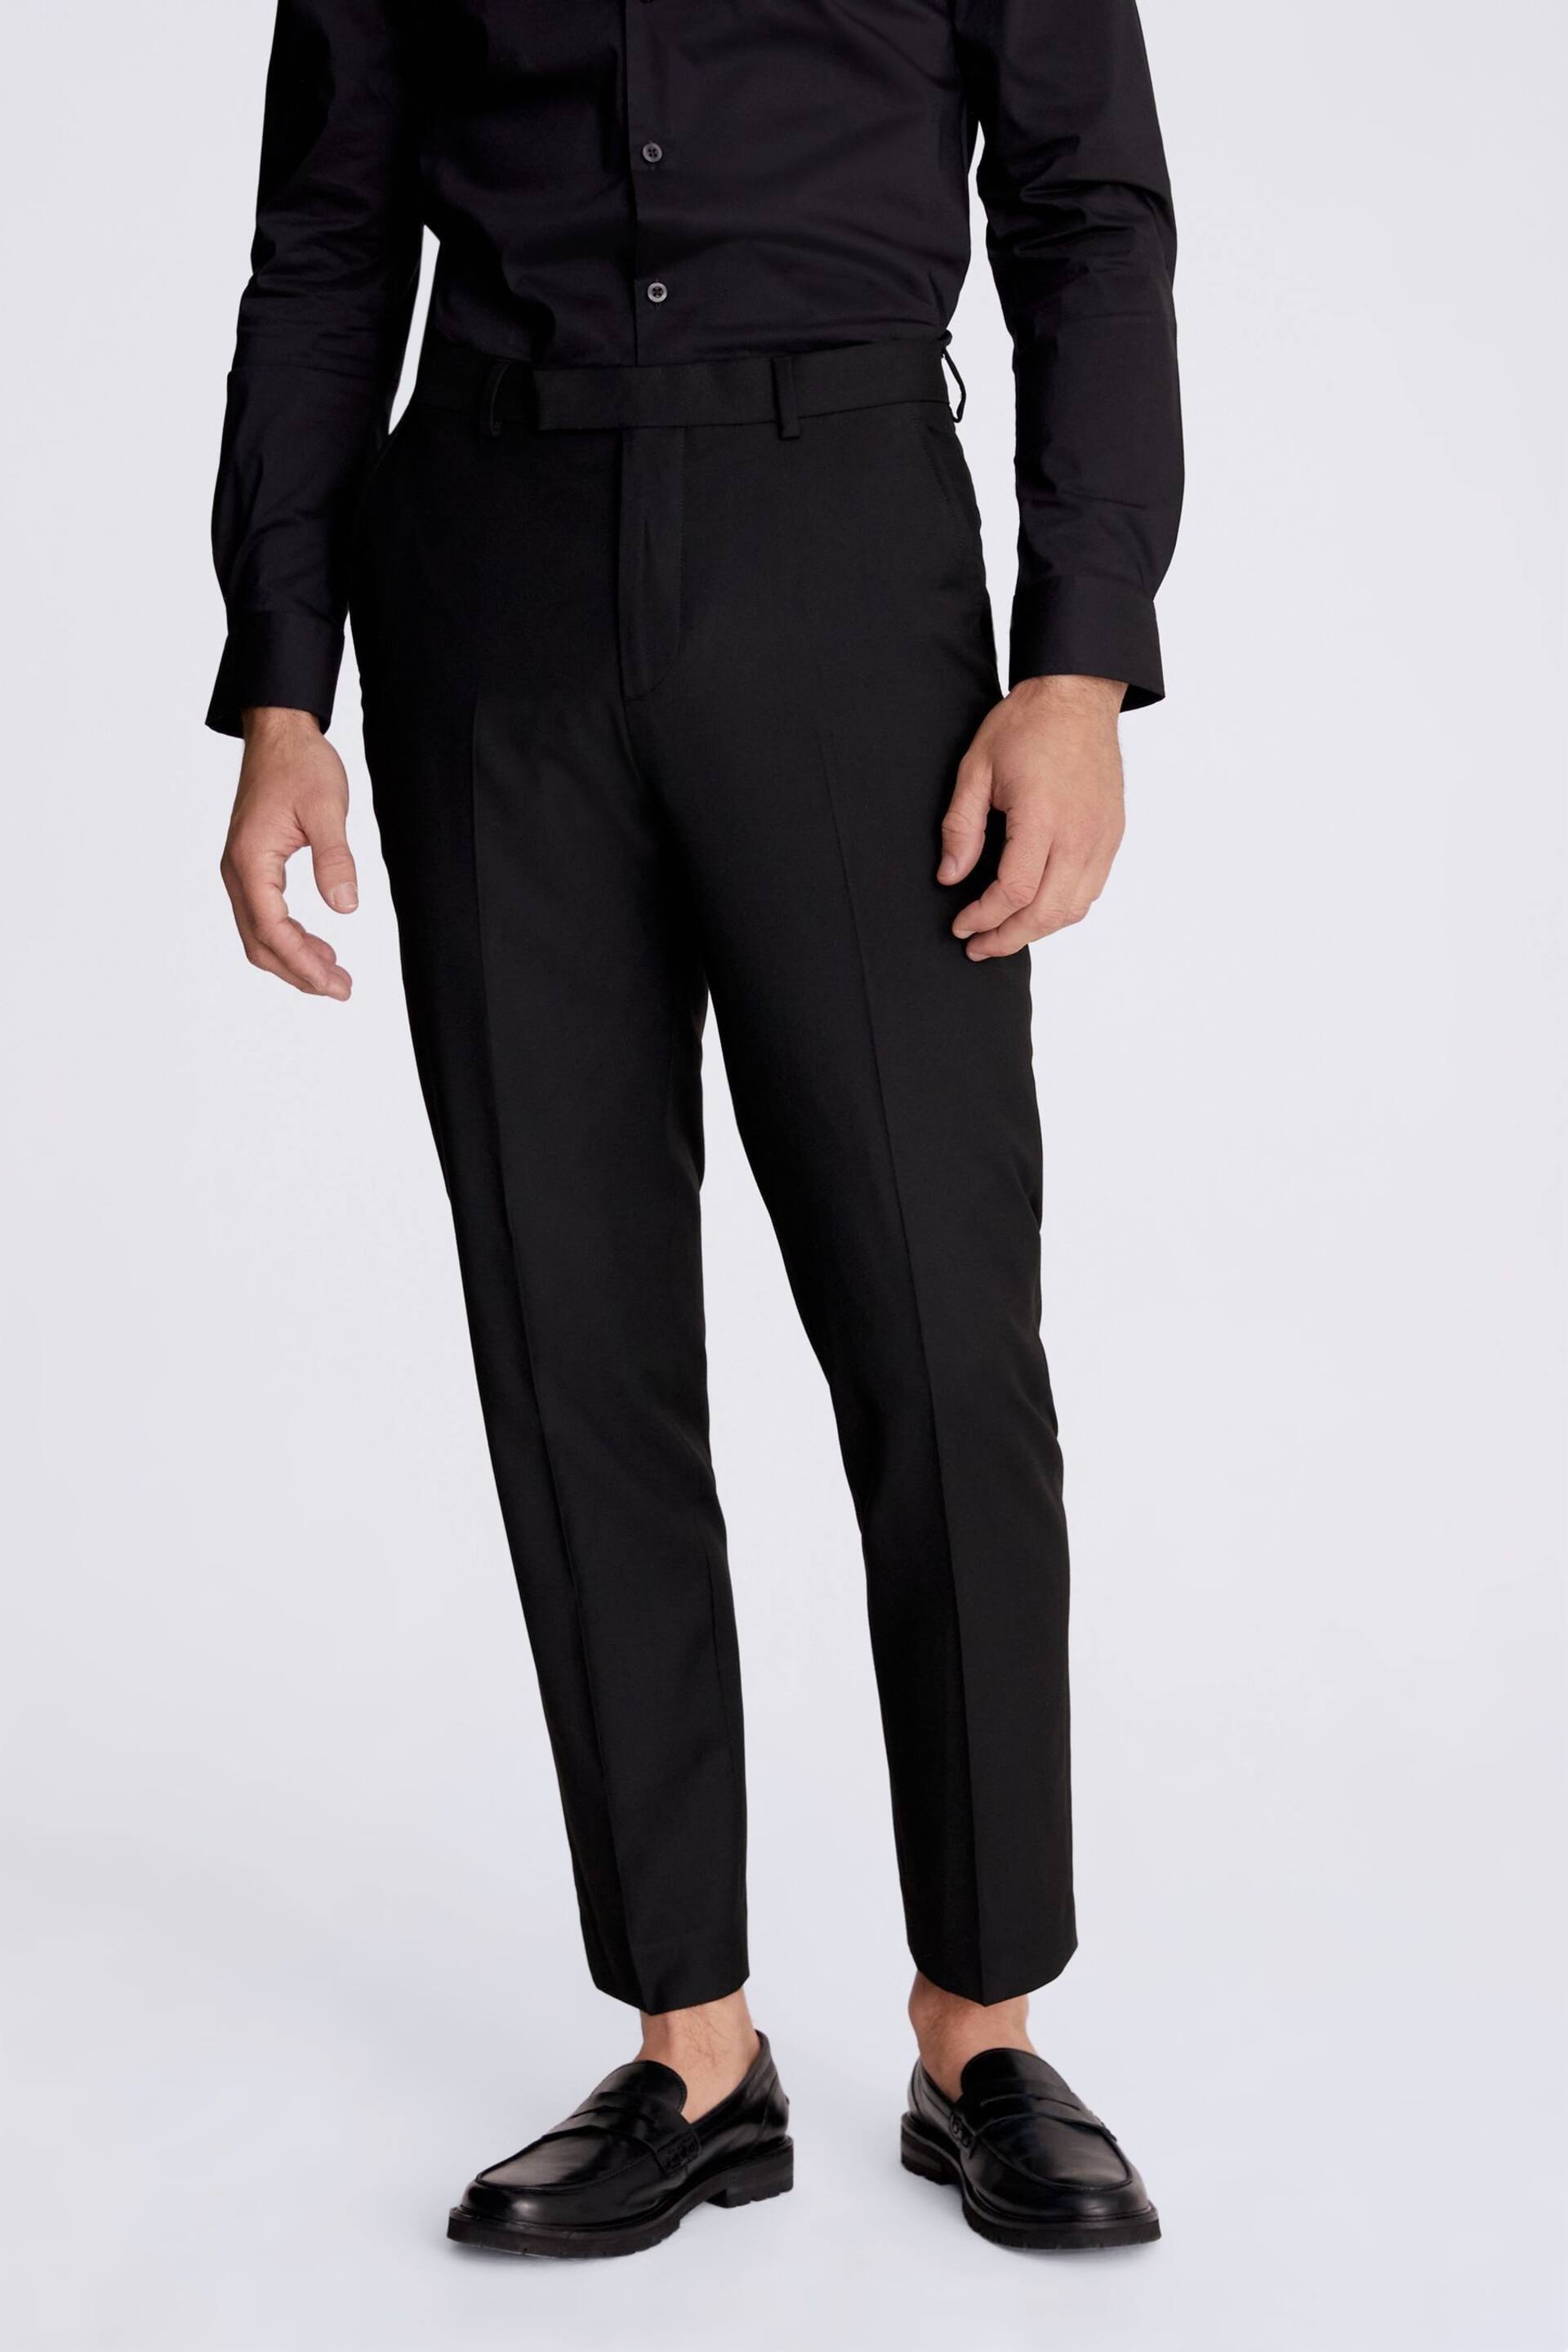 MOSS Black Suit: Trousers - Image 1 of 3